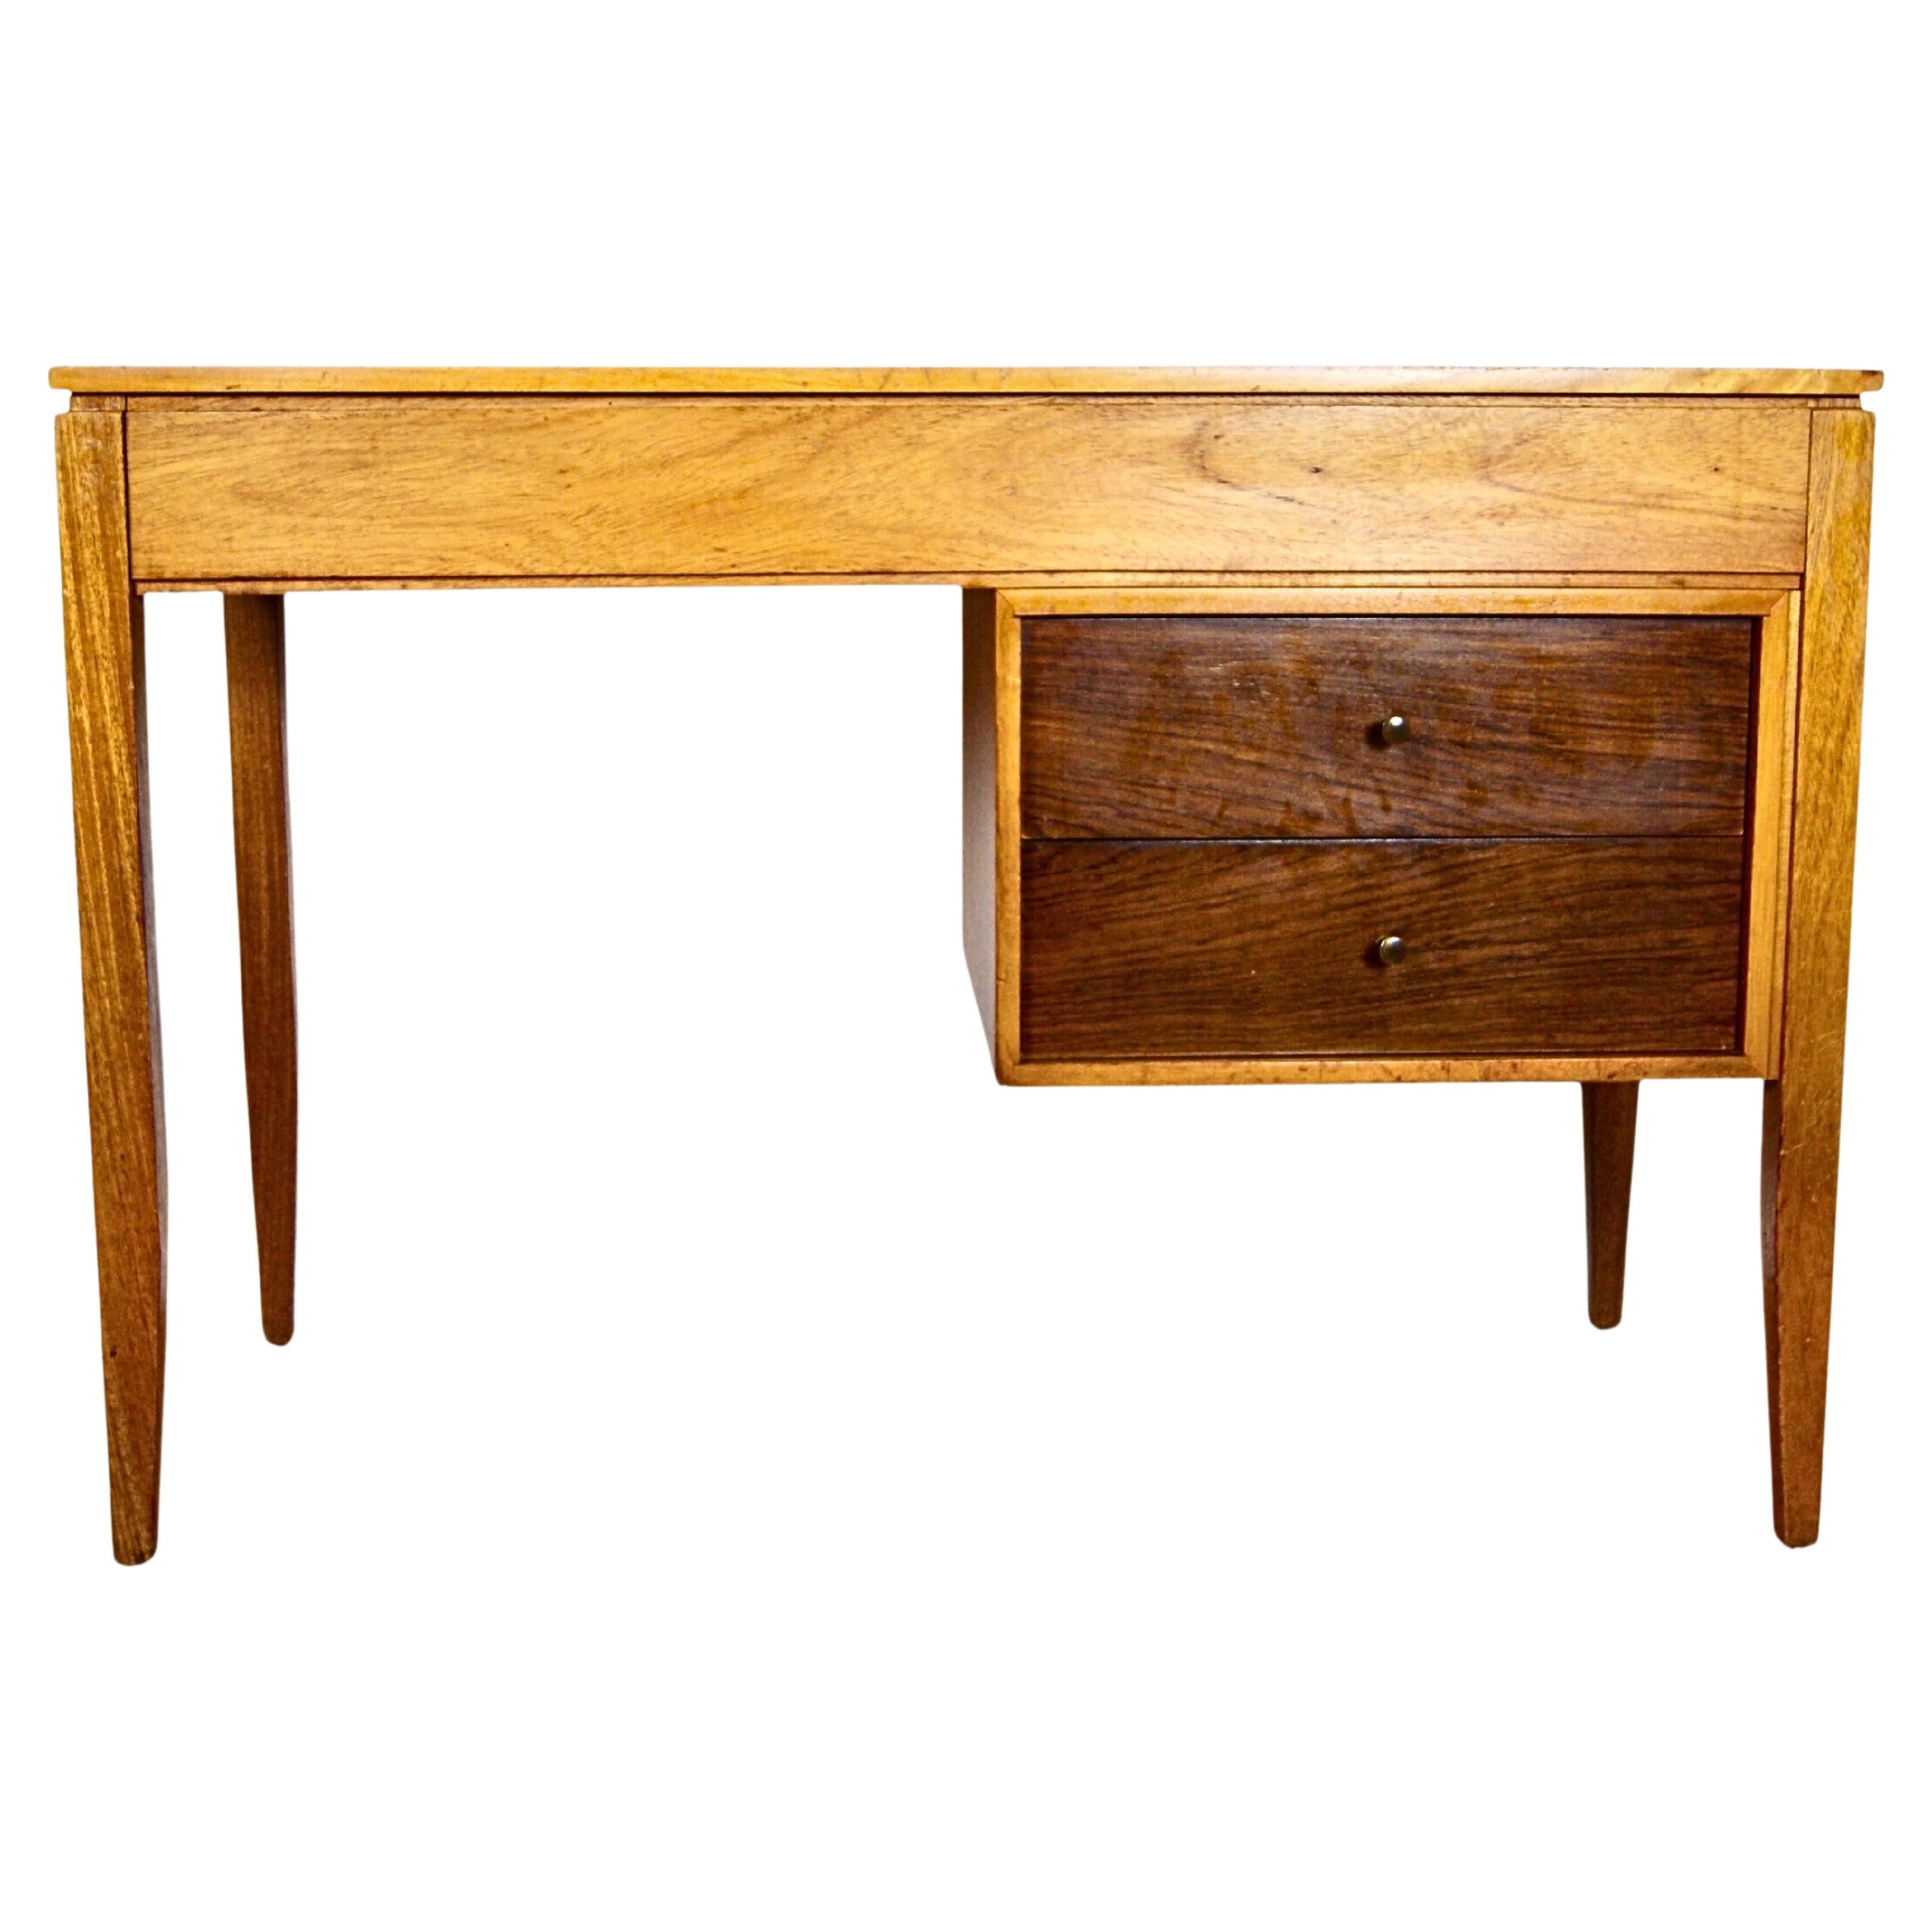 Retro Leather Top Desk/Dresser with Mirrored Interior Peter Hayward for UNIFLEX For Sale